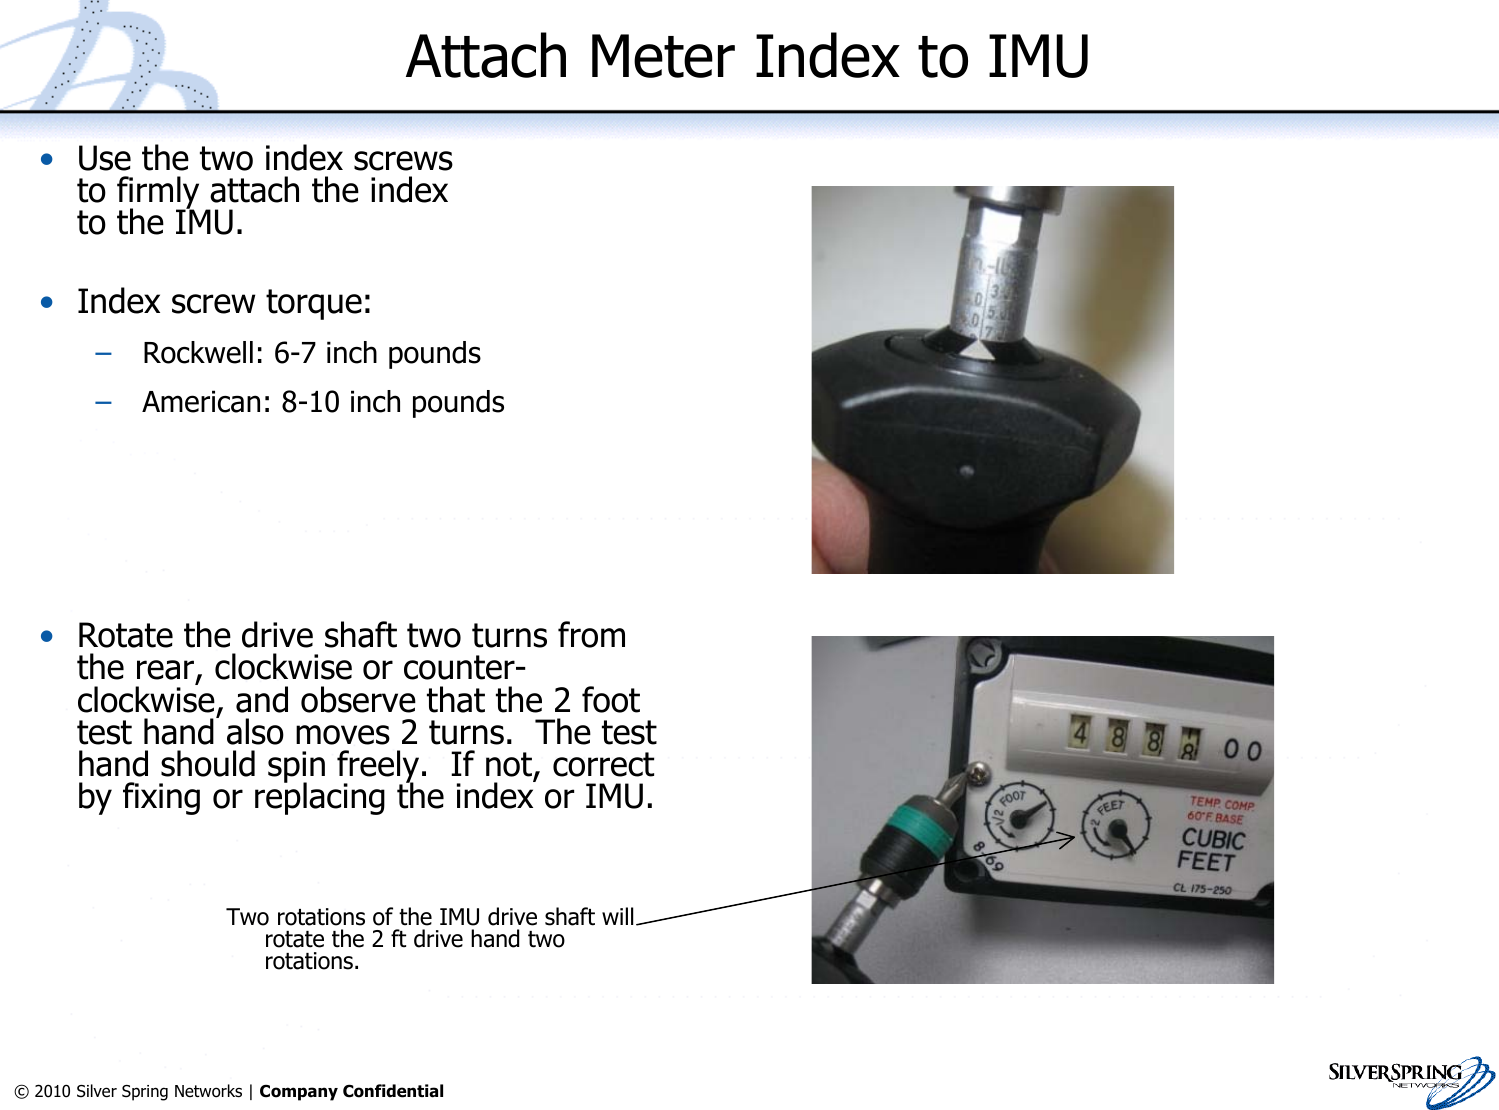 14© 2010 Silver Spring Networks | Company Confidential Attach Meter Index to IMU•Use the two index screwsto firmly attach the indexto the IMU.•Index screw torque:–Rockwell: 6-7 inch pounds–American: 8-10 inch pounds•Rotate the drive shaft two turns fromthe rear, clockwise or counter-clockwise, and observe that the 2 foottest hand also moves 2 turns.  The testhand should spin freely.  If not, correctby fixing or replacing the index or IMU.Two rotations of the IMU drive shaft willrotate the 2 ft drive hand tworotations.